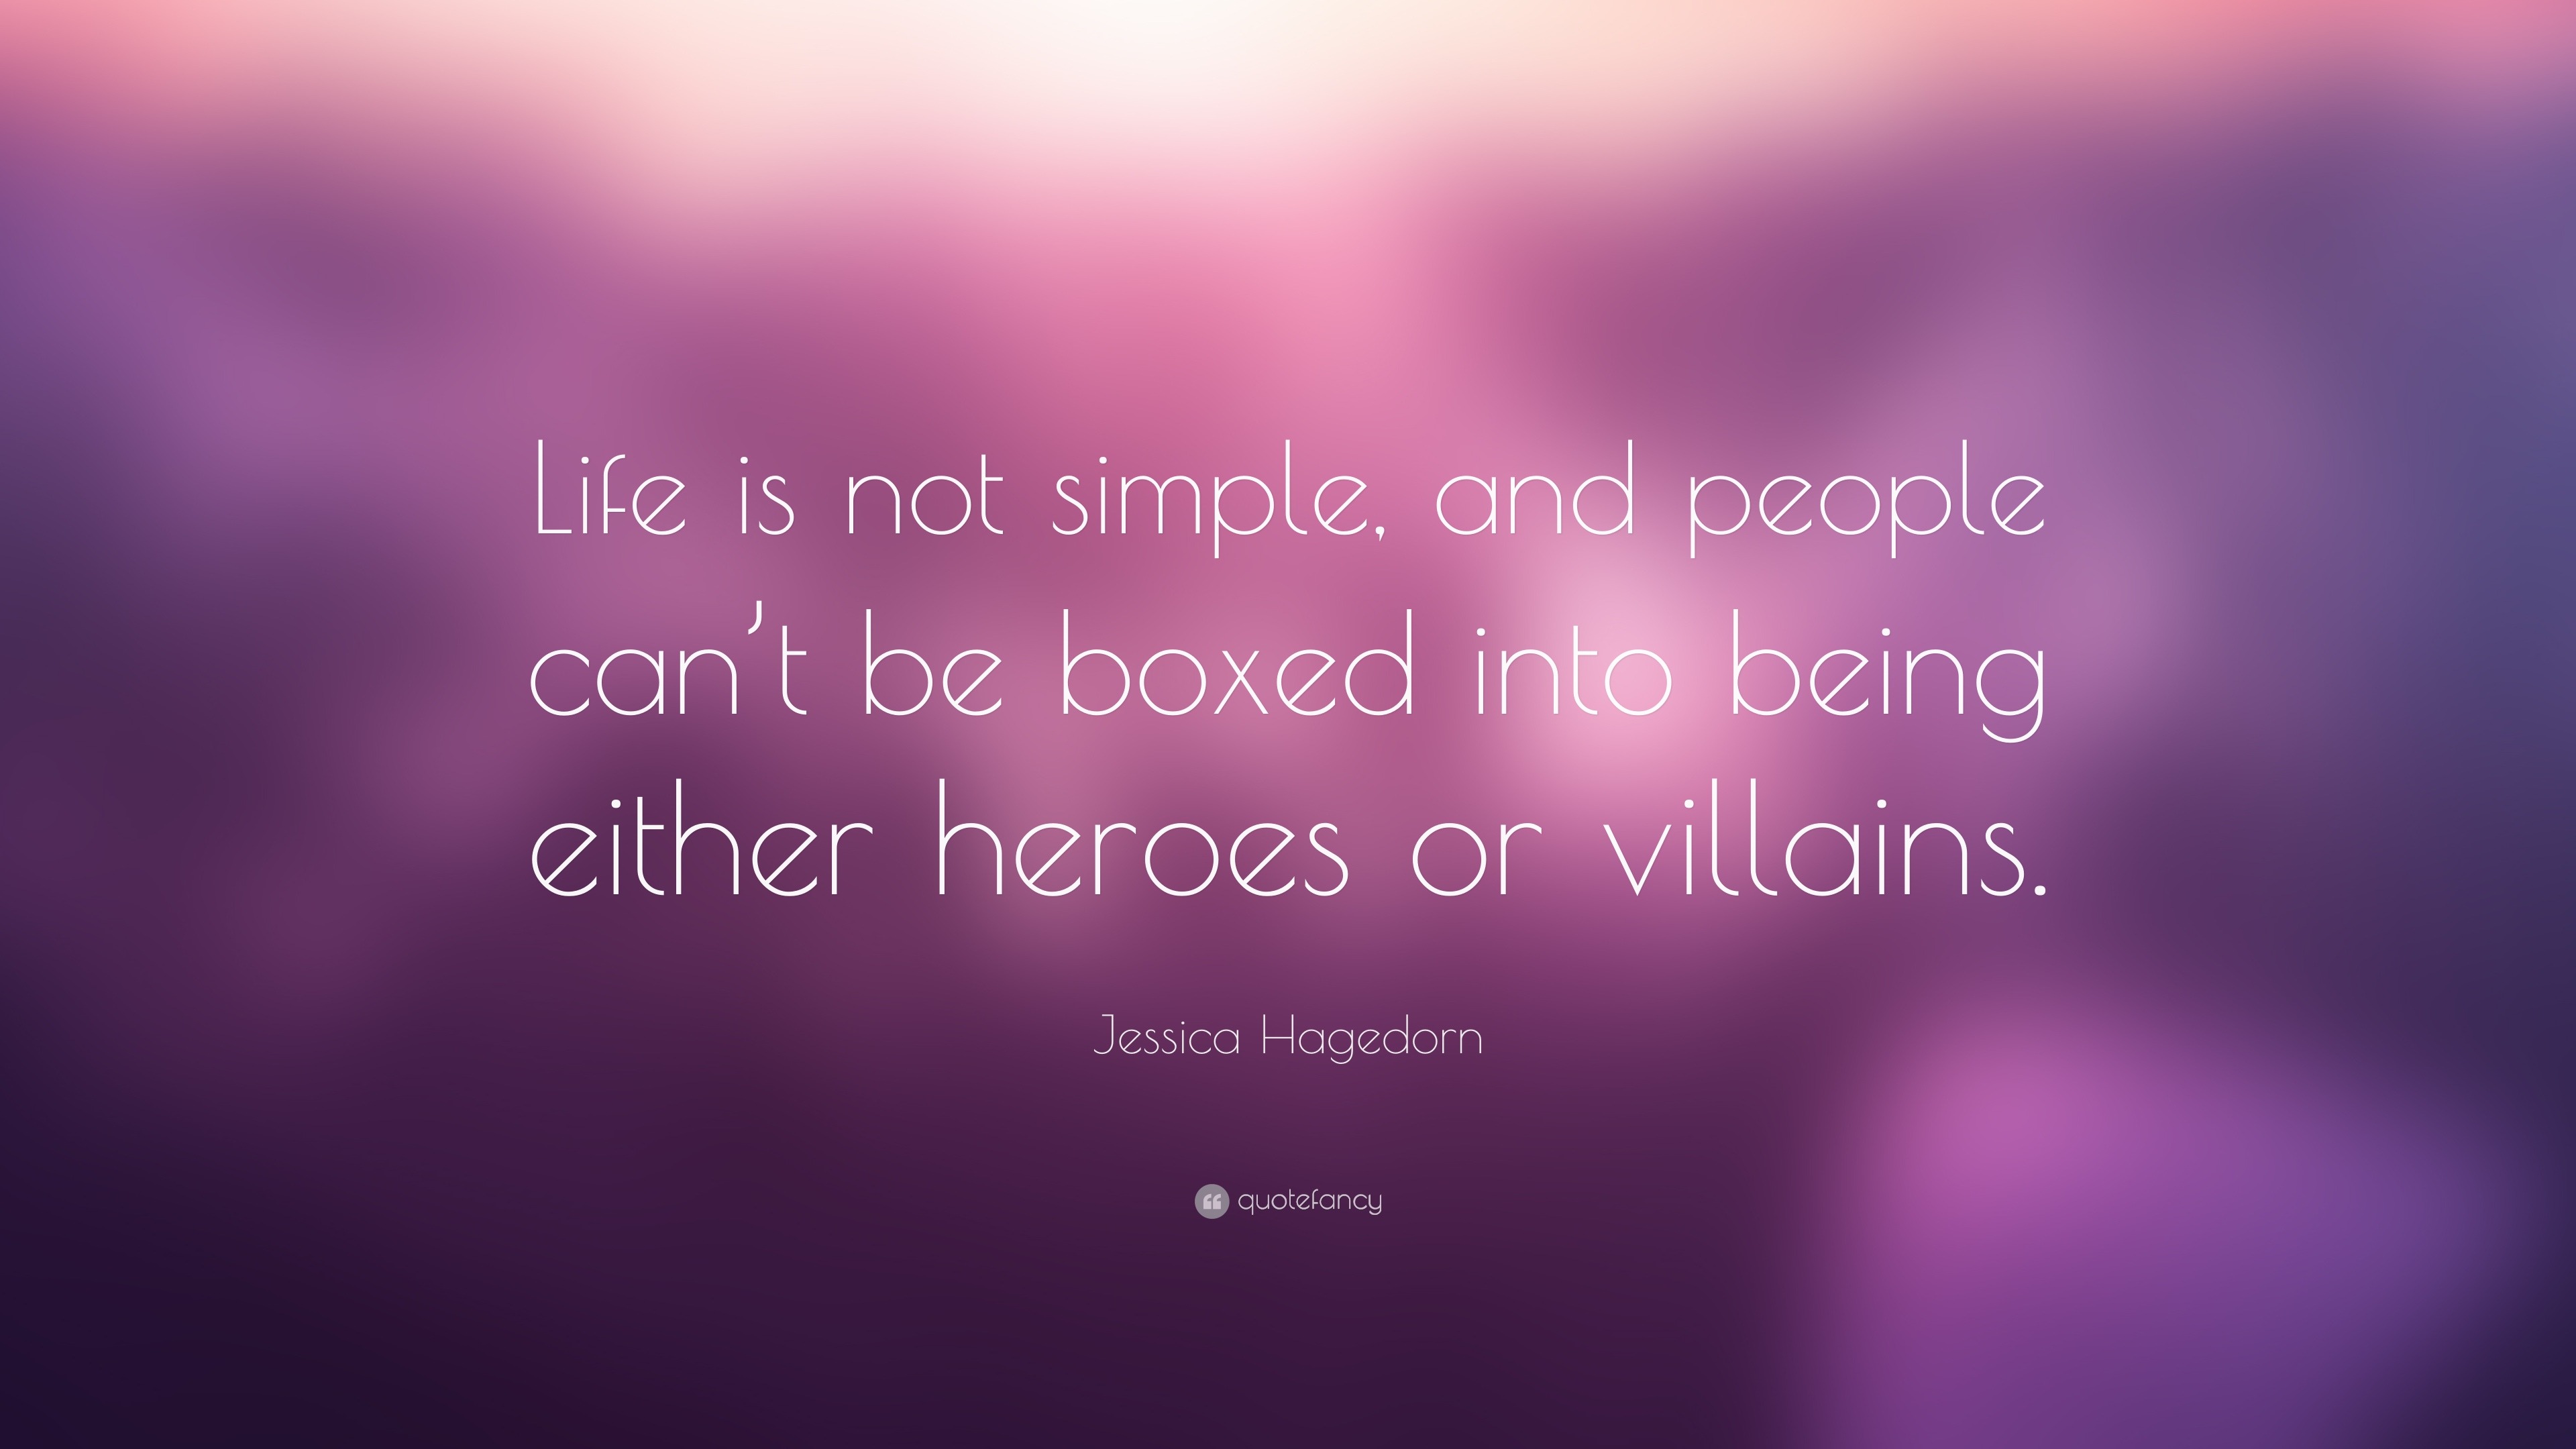 Jessica Hagedorn Quote: “Life is not simple, and people can’t be boxed ...